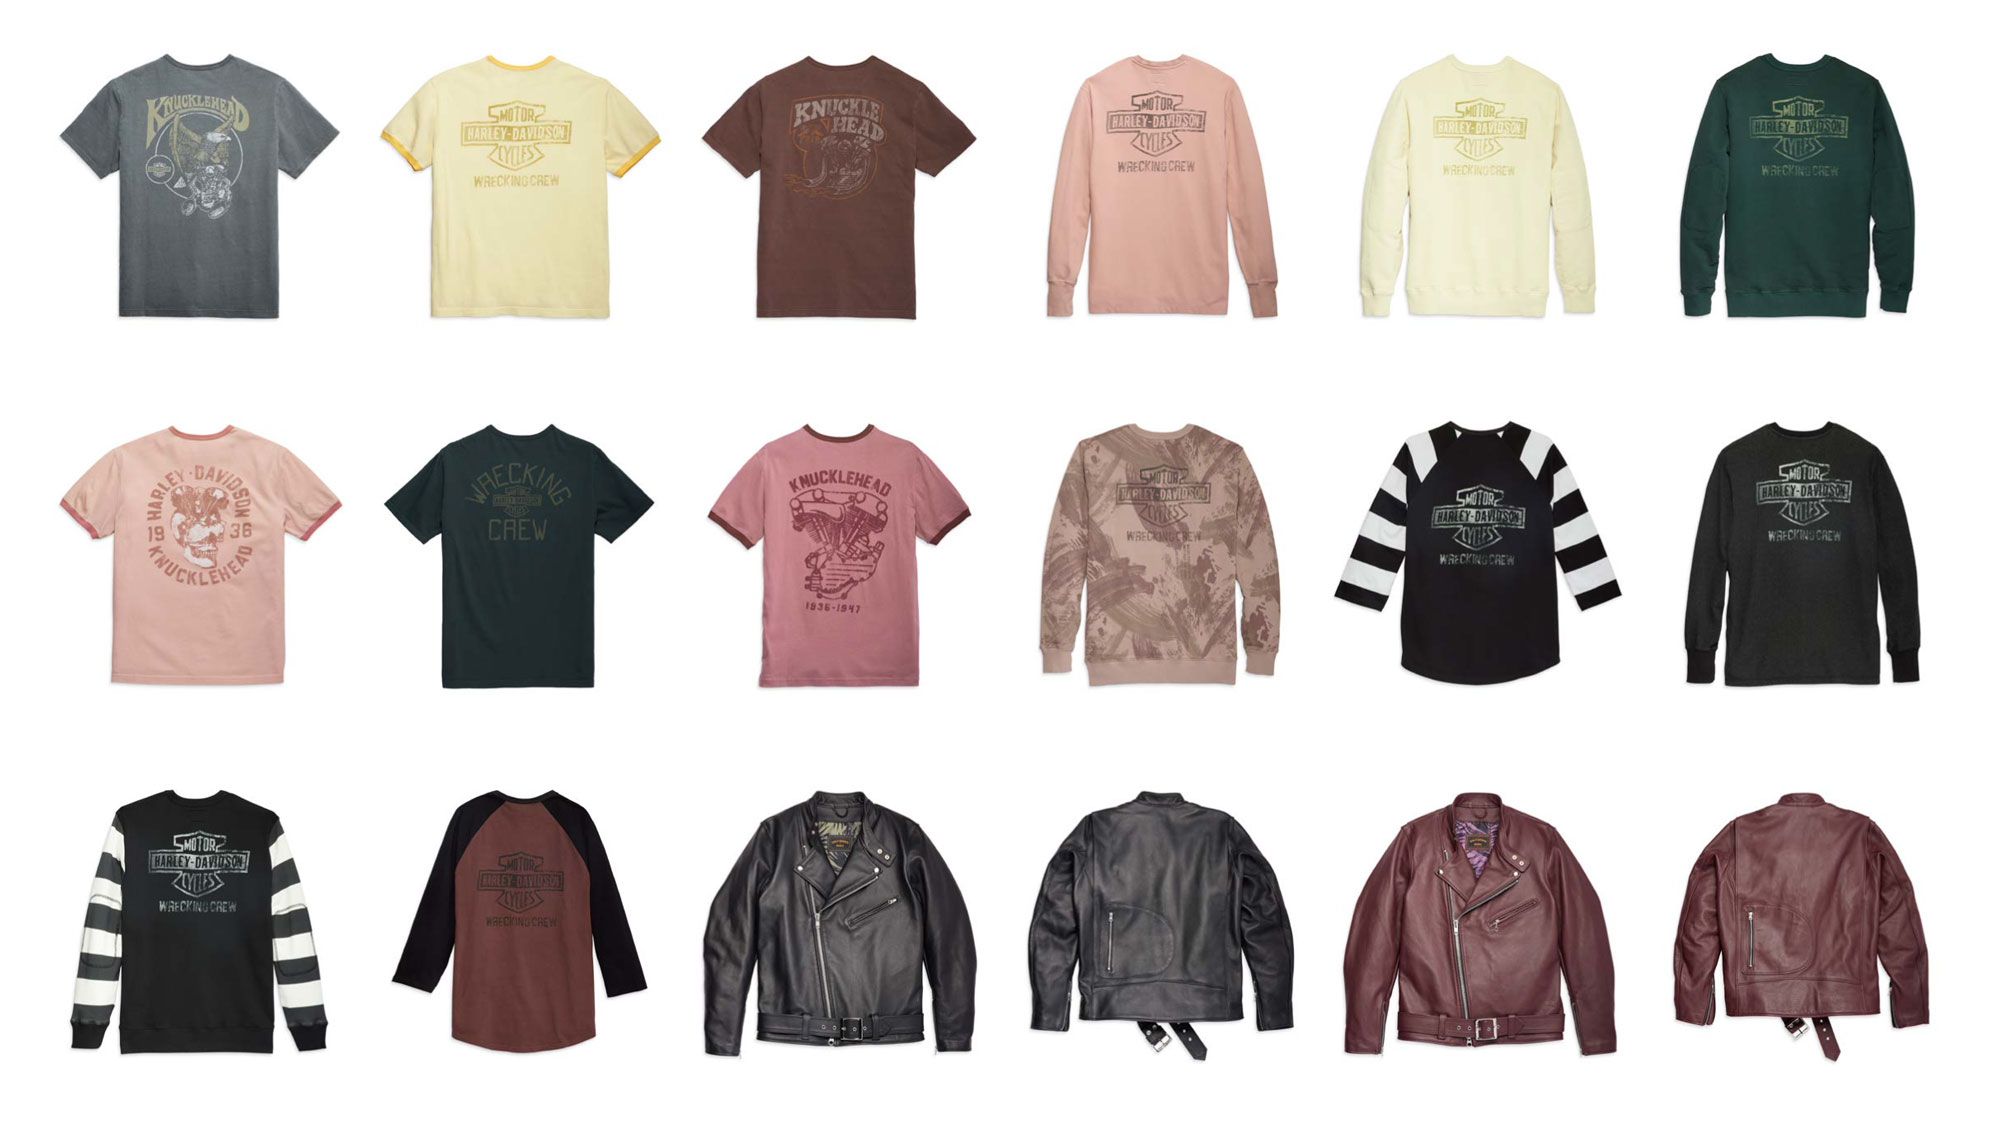 The Harley-Davidson Museum X Jason Momoa 2022 Collection: T-shirts, jerseys, and leather jackets.